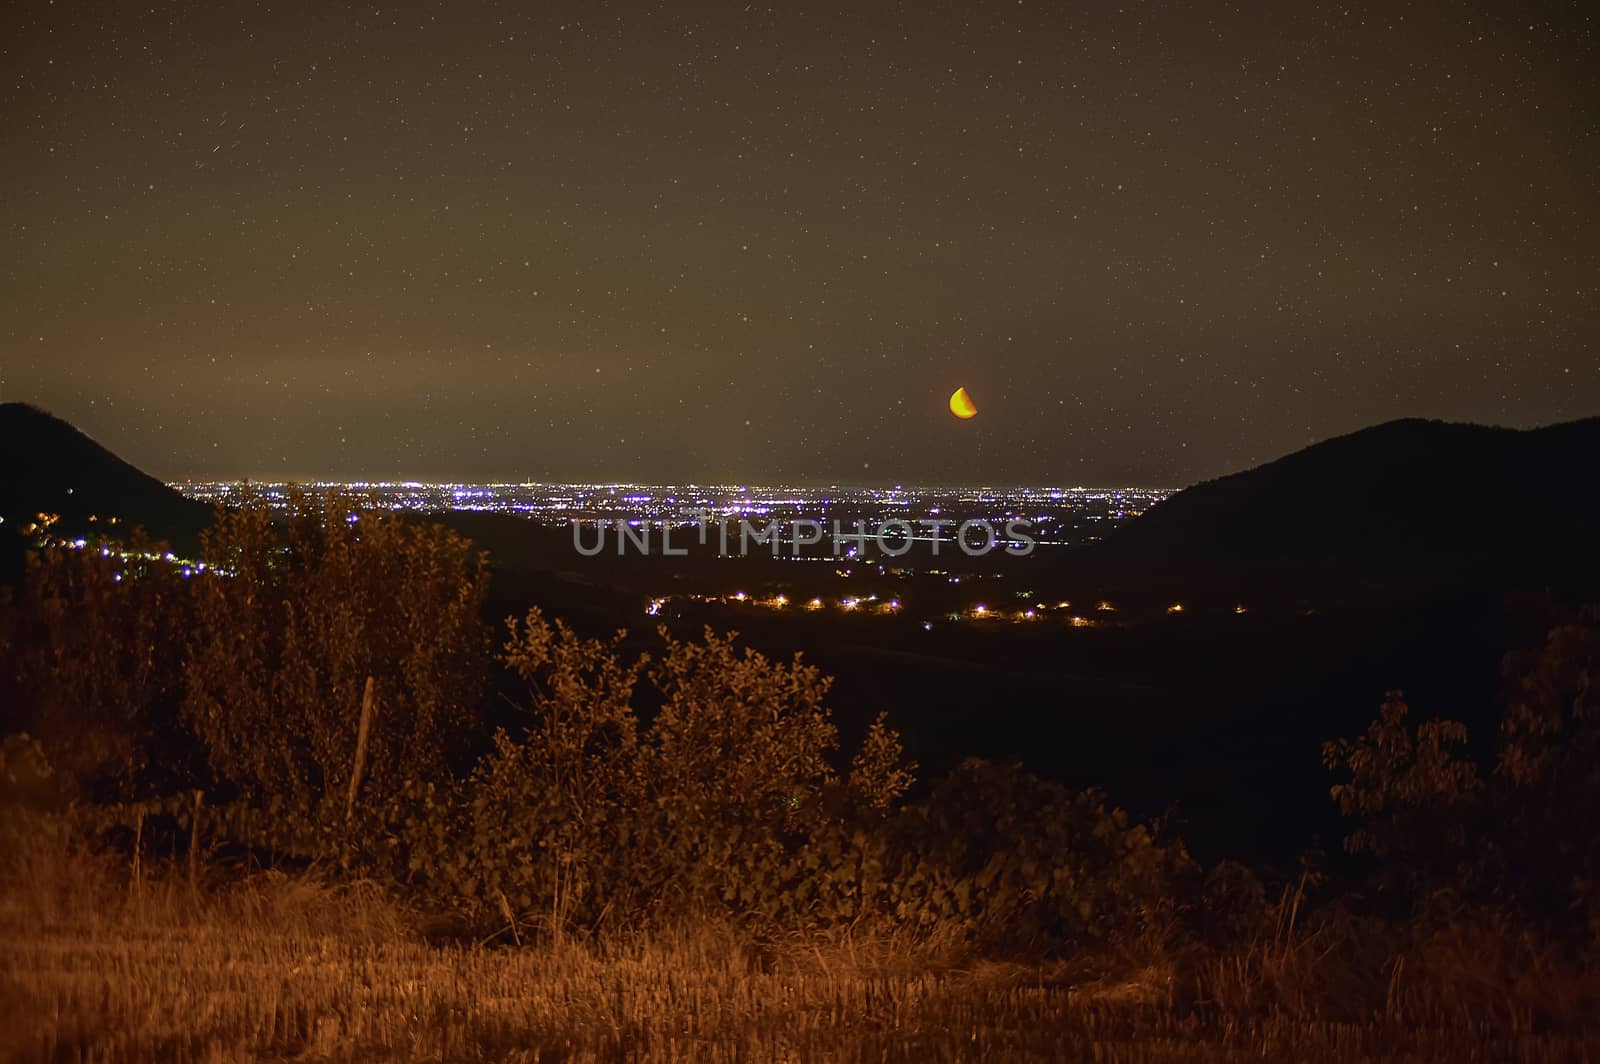 Hilly landscape of northern Italy, Precisely of Este in Veneto. Very impressive night landscape where you can see the hillsides on the sides and the lights of the city that are lost in the horizon under a starry sky with warm colors and with the moon well visible.